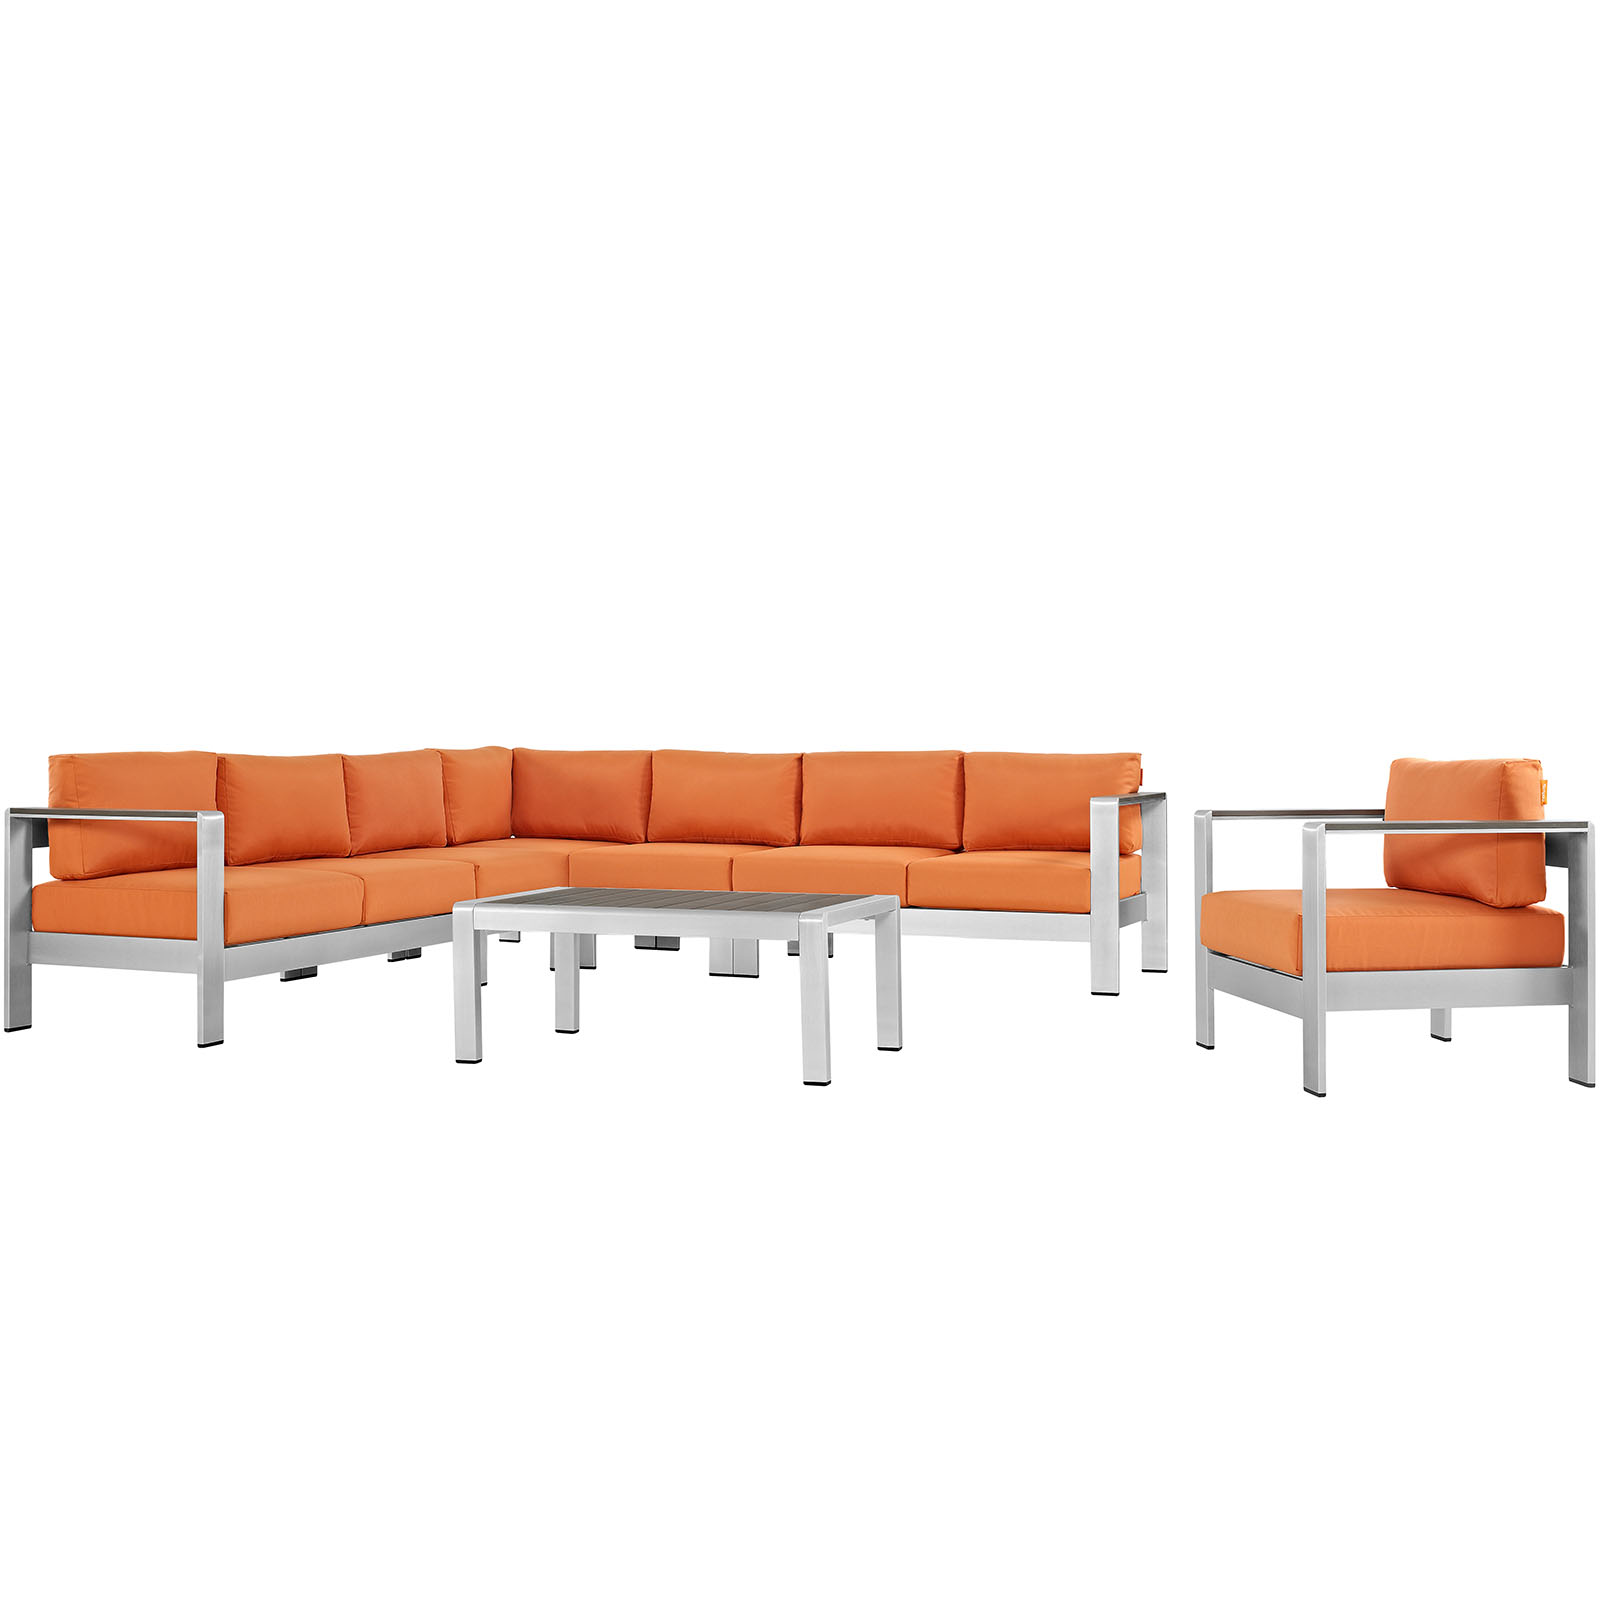 Modway Shore 7 Piece Outdoor Patio Aluminum Sectional Sofa Set in Silver Orange - image 2 of 8